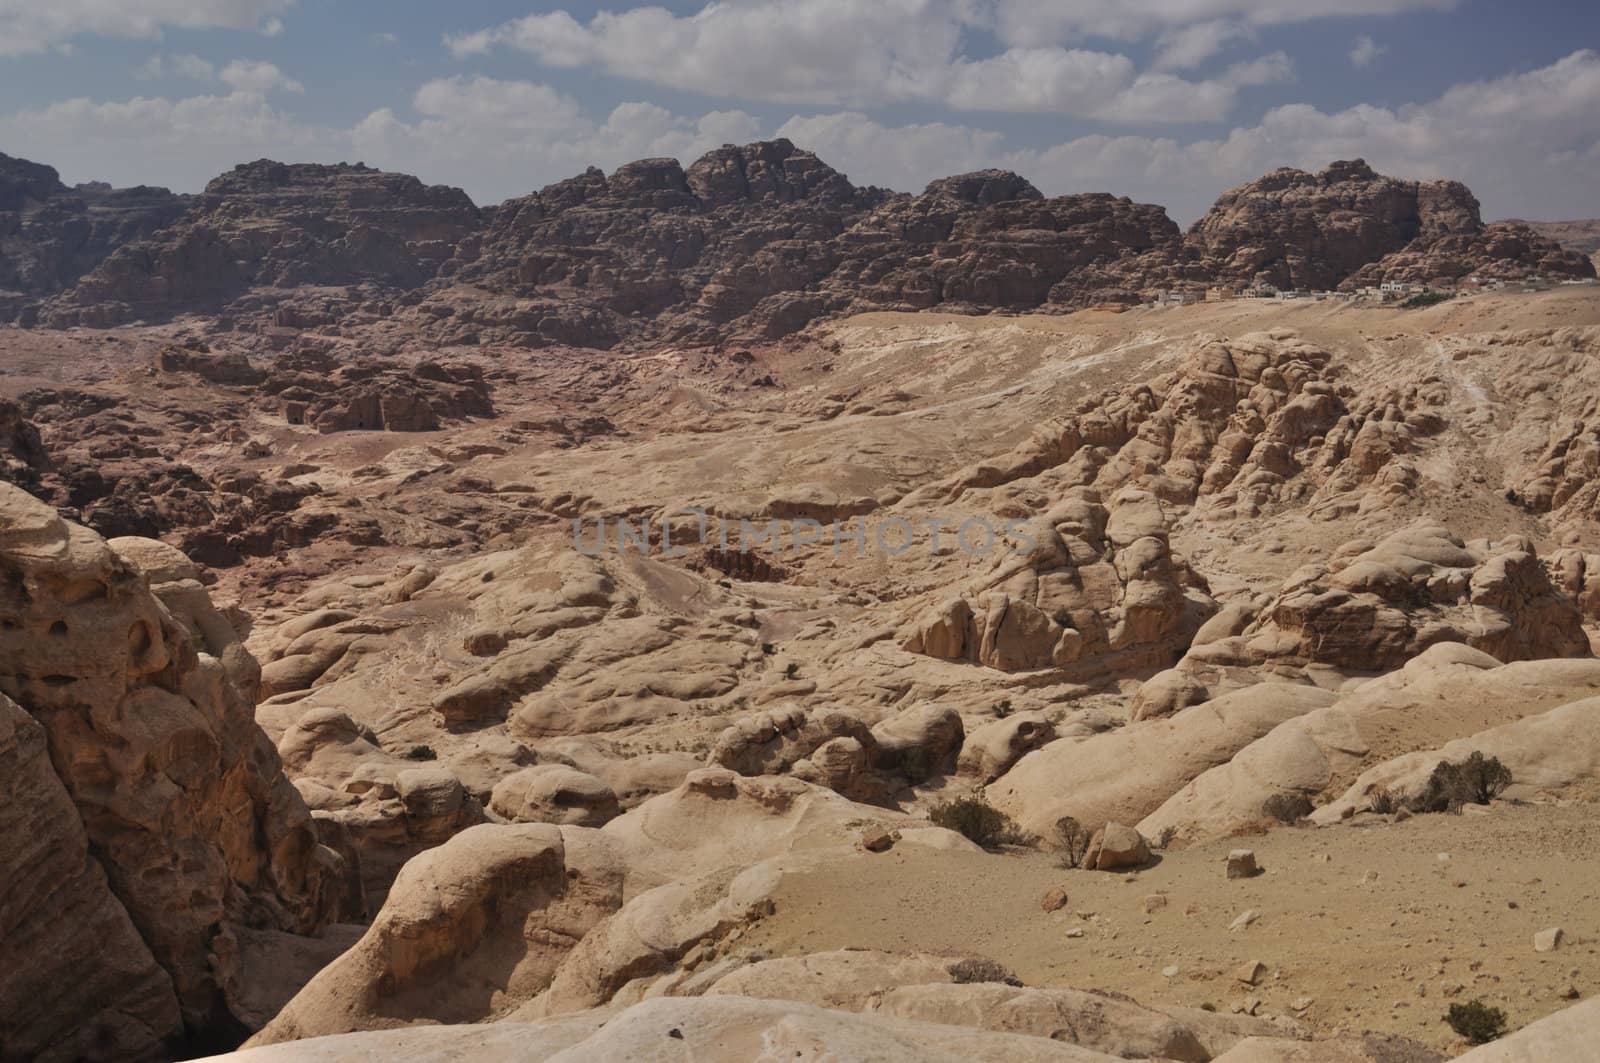 Around the archeoligical site Petra is so much fantastic and breath-taking view, just go hiking there.